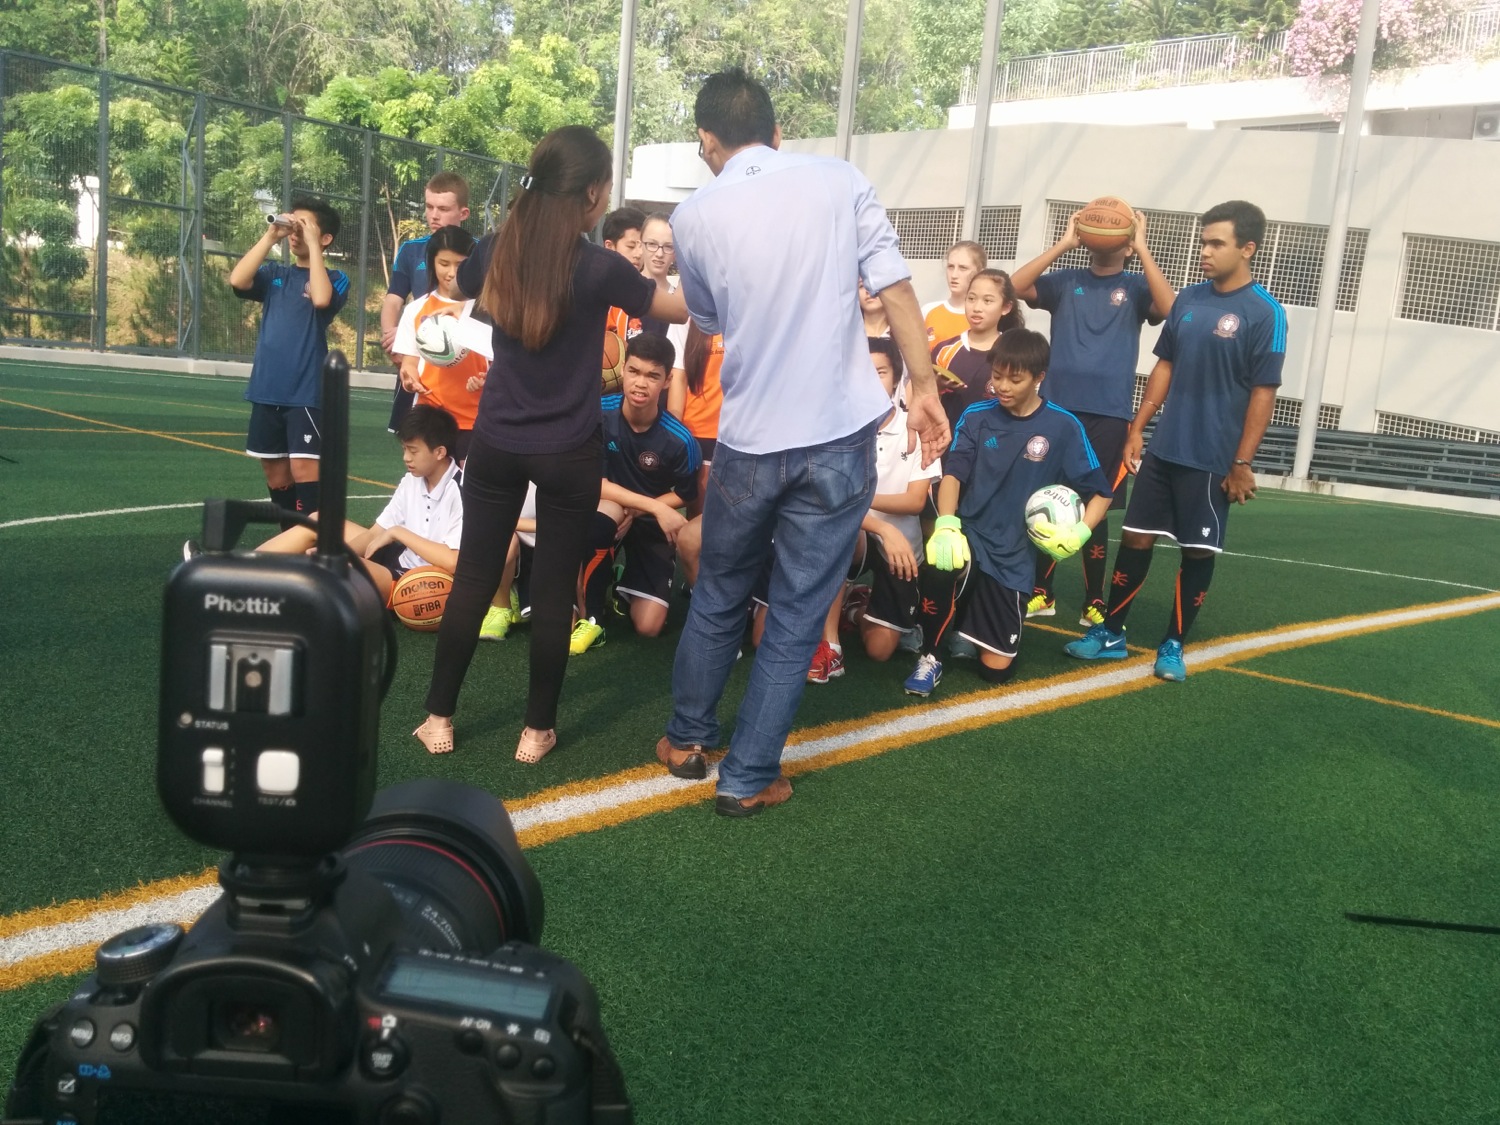 BTS: Special group pictures and lighting setup at The British School of Kuala Lumpur